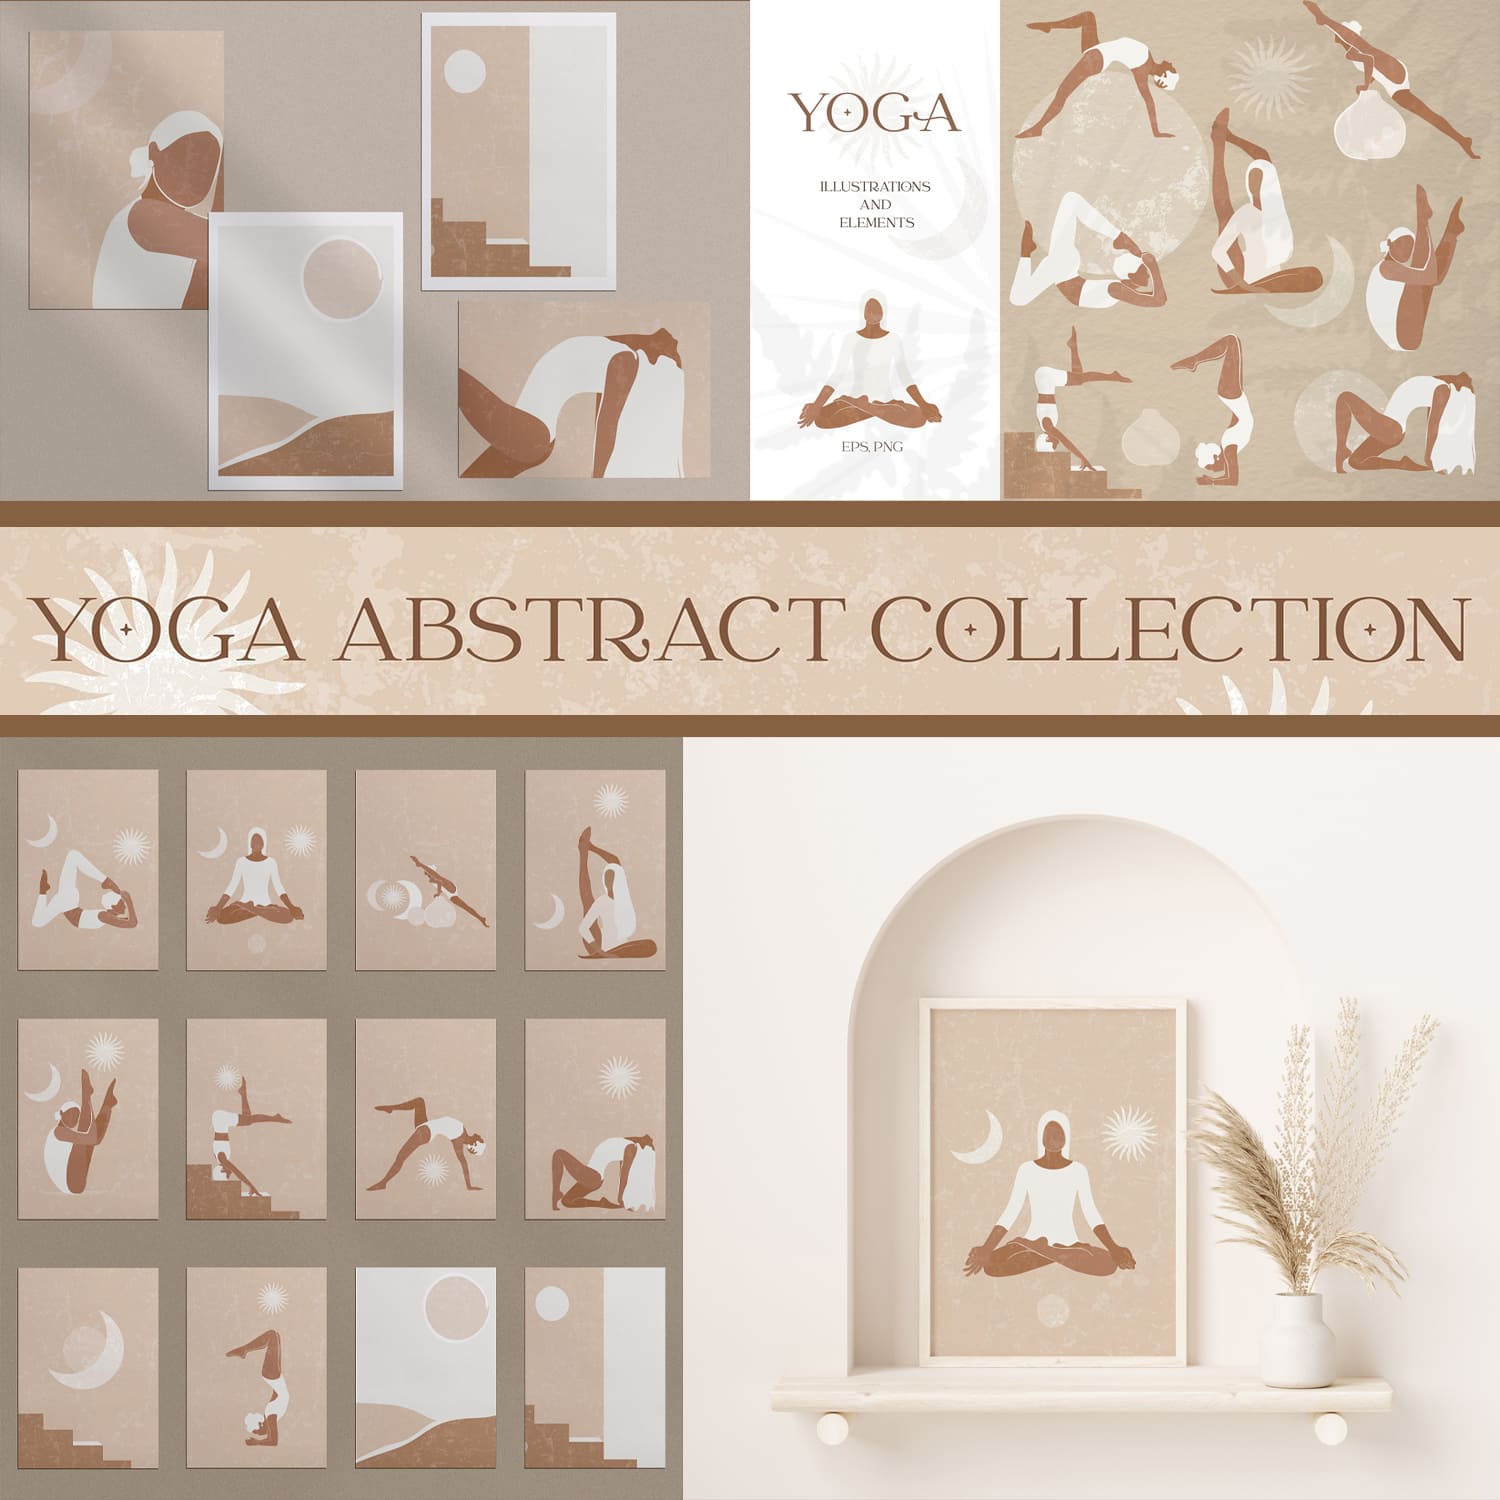 Yoga abstract graphic collection Created By AleksArt.